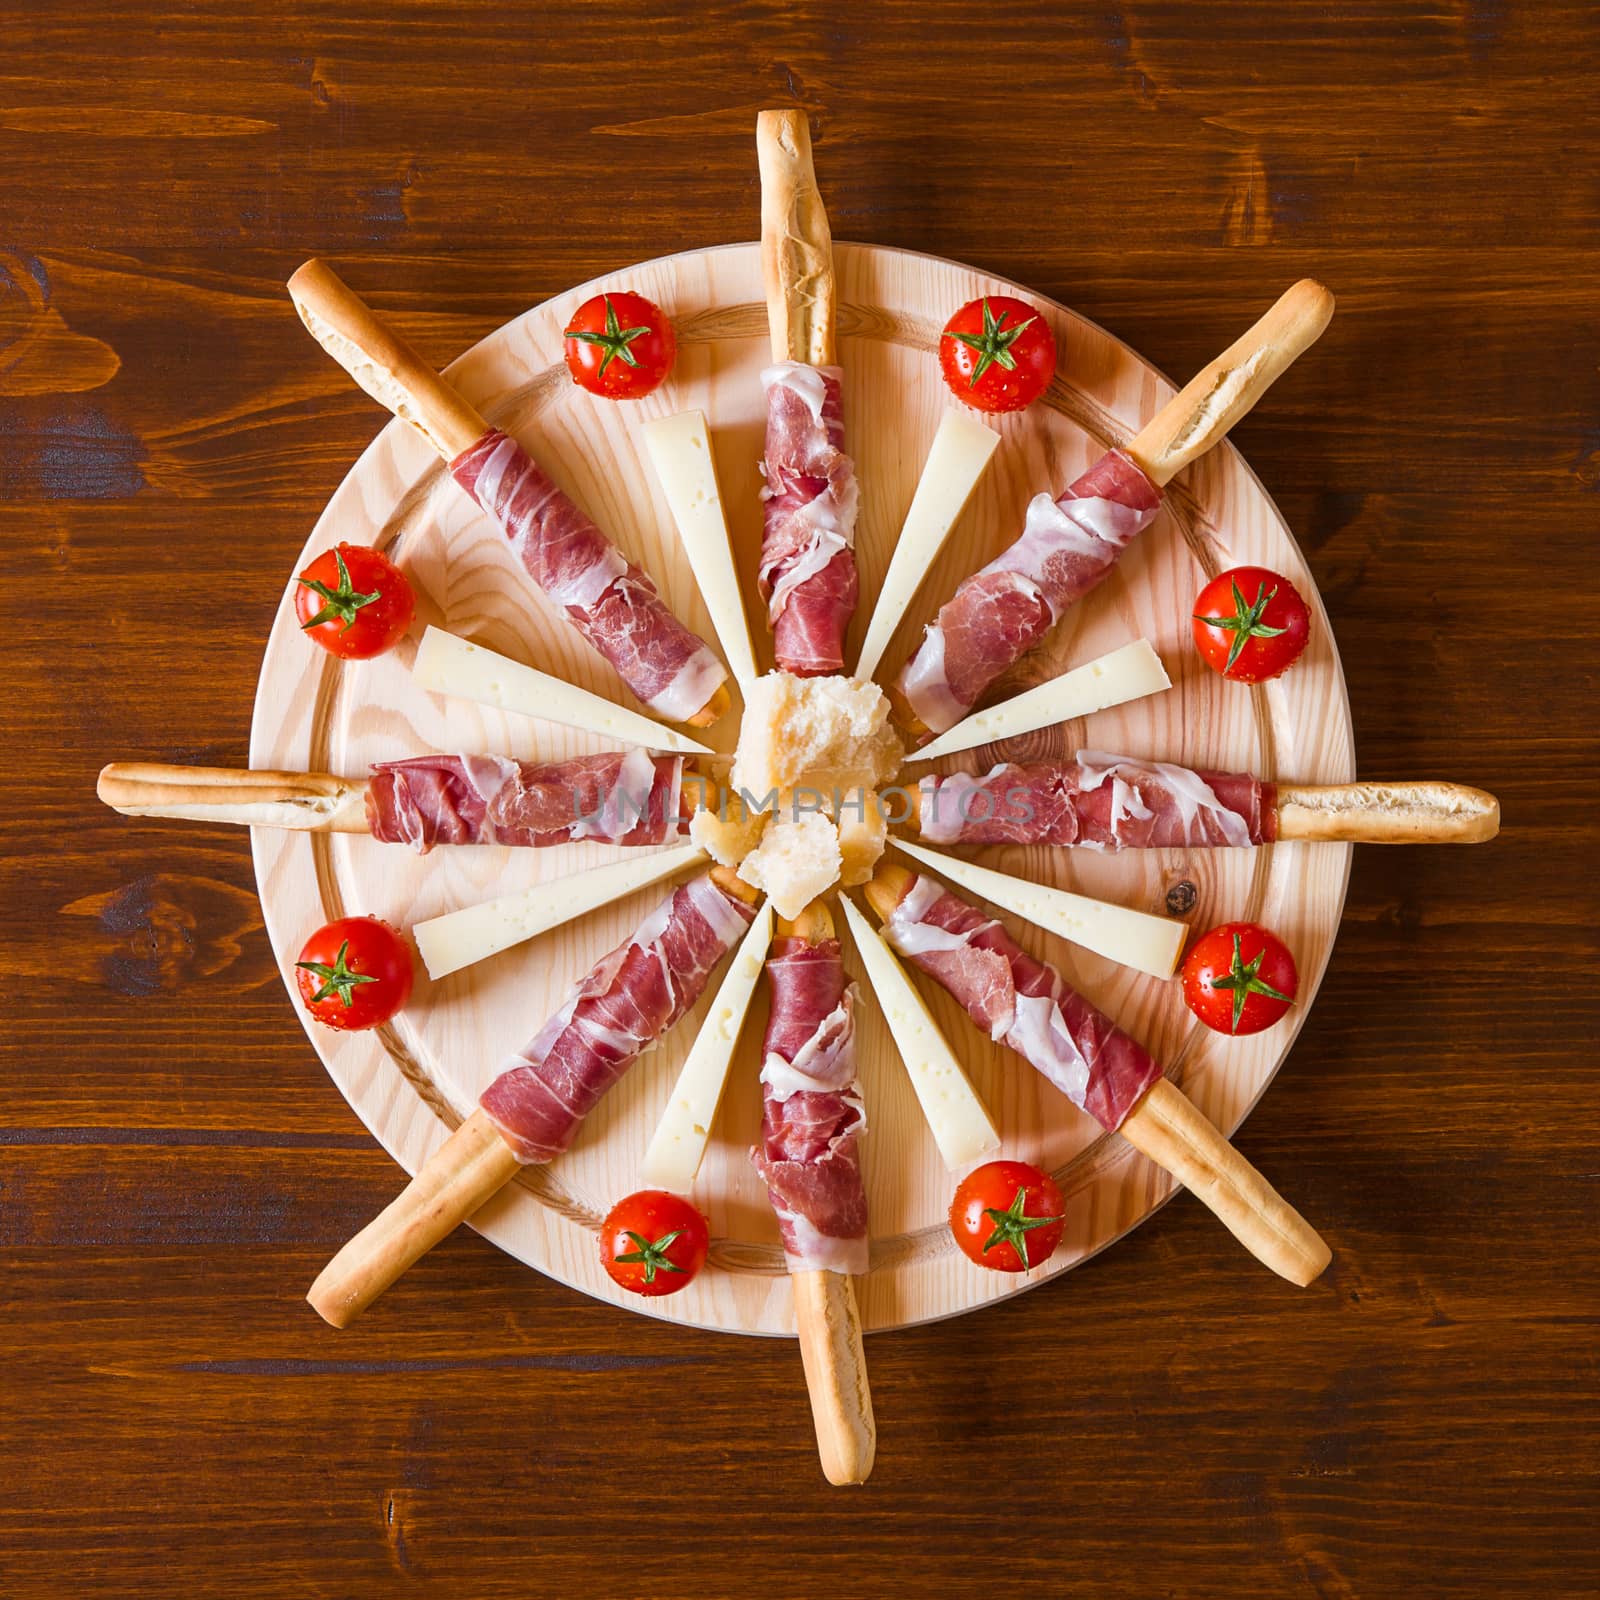 Chopping board with ham cheese and cherry tomatoes by LuigiMorbidelli